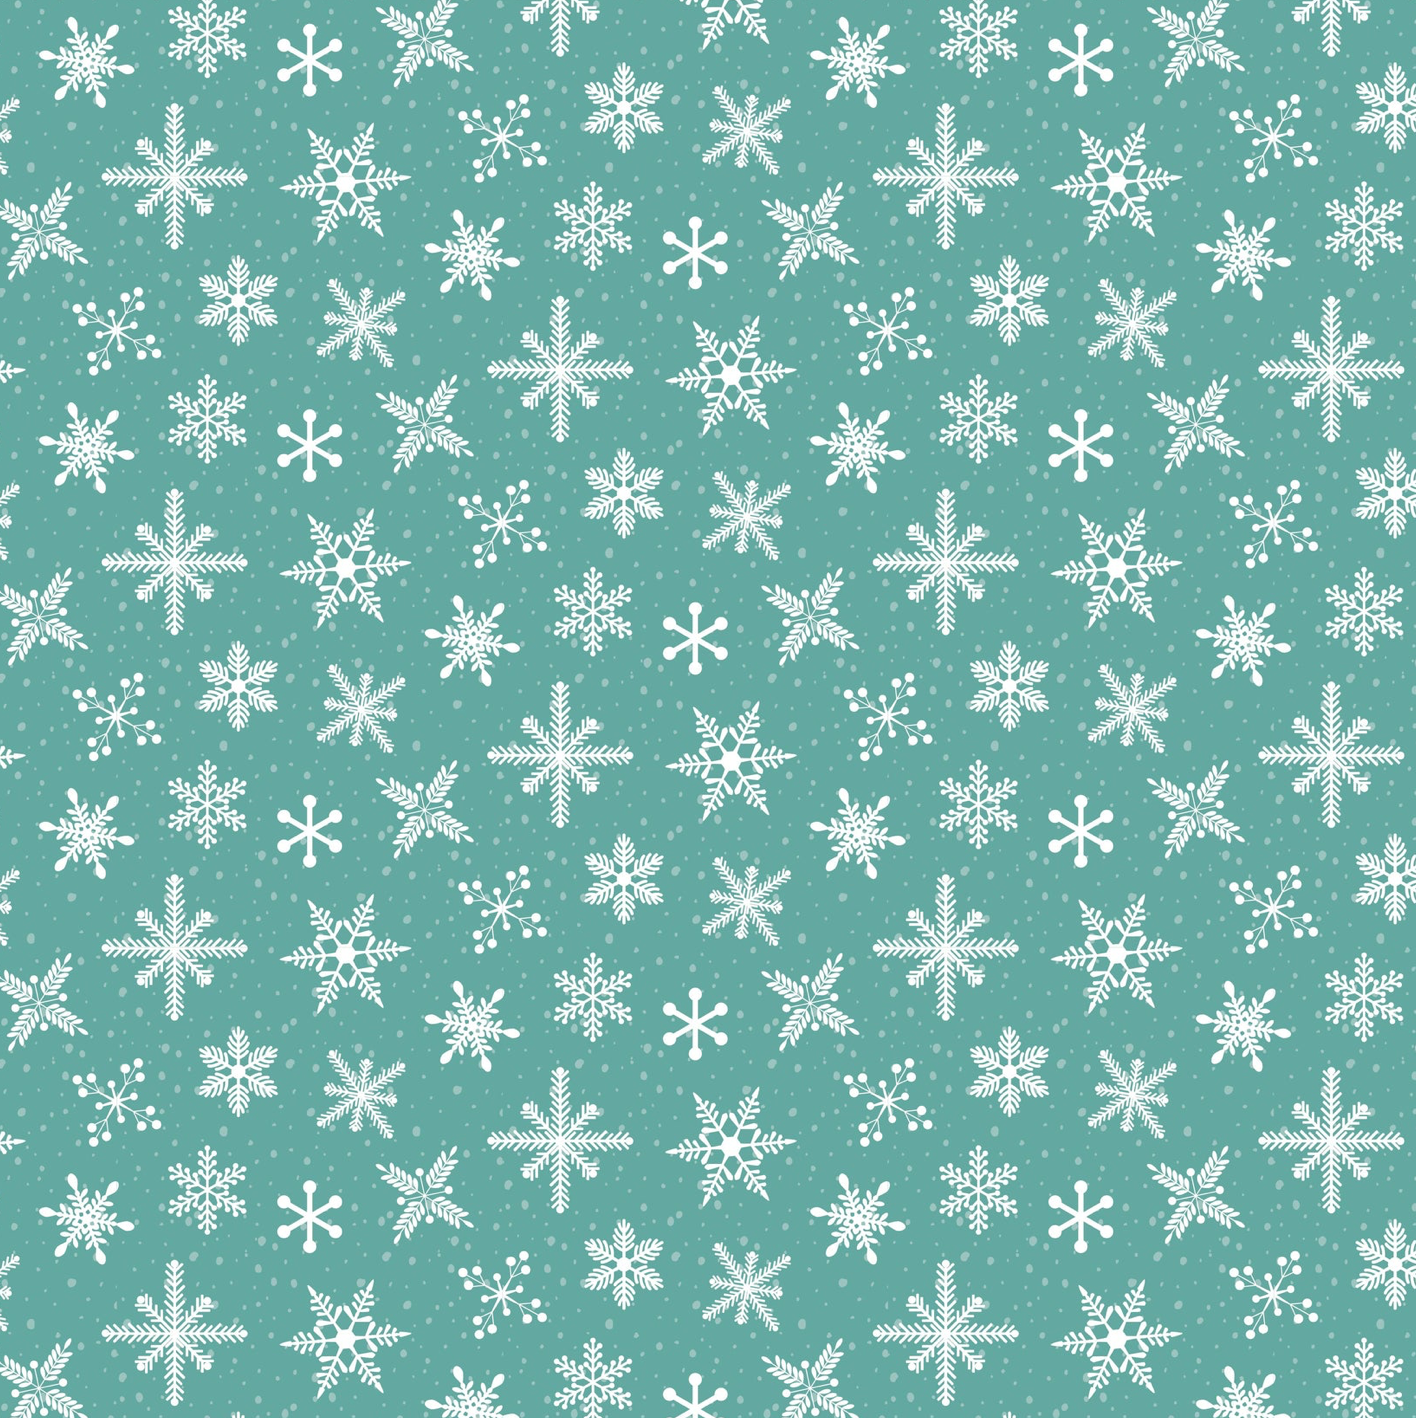 Prairie Christmas, Snowfall Teal, PC24352, sold by the 1/2 yard, *PREORDER